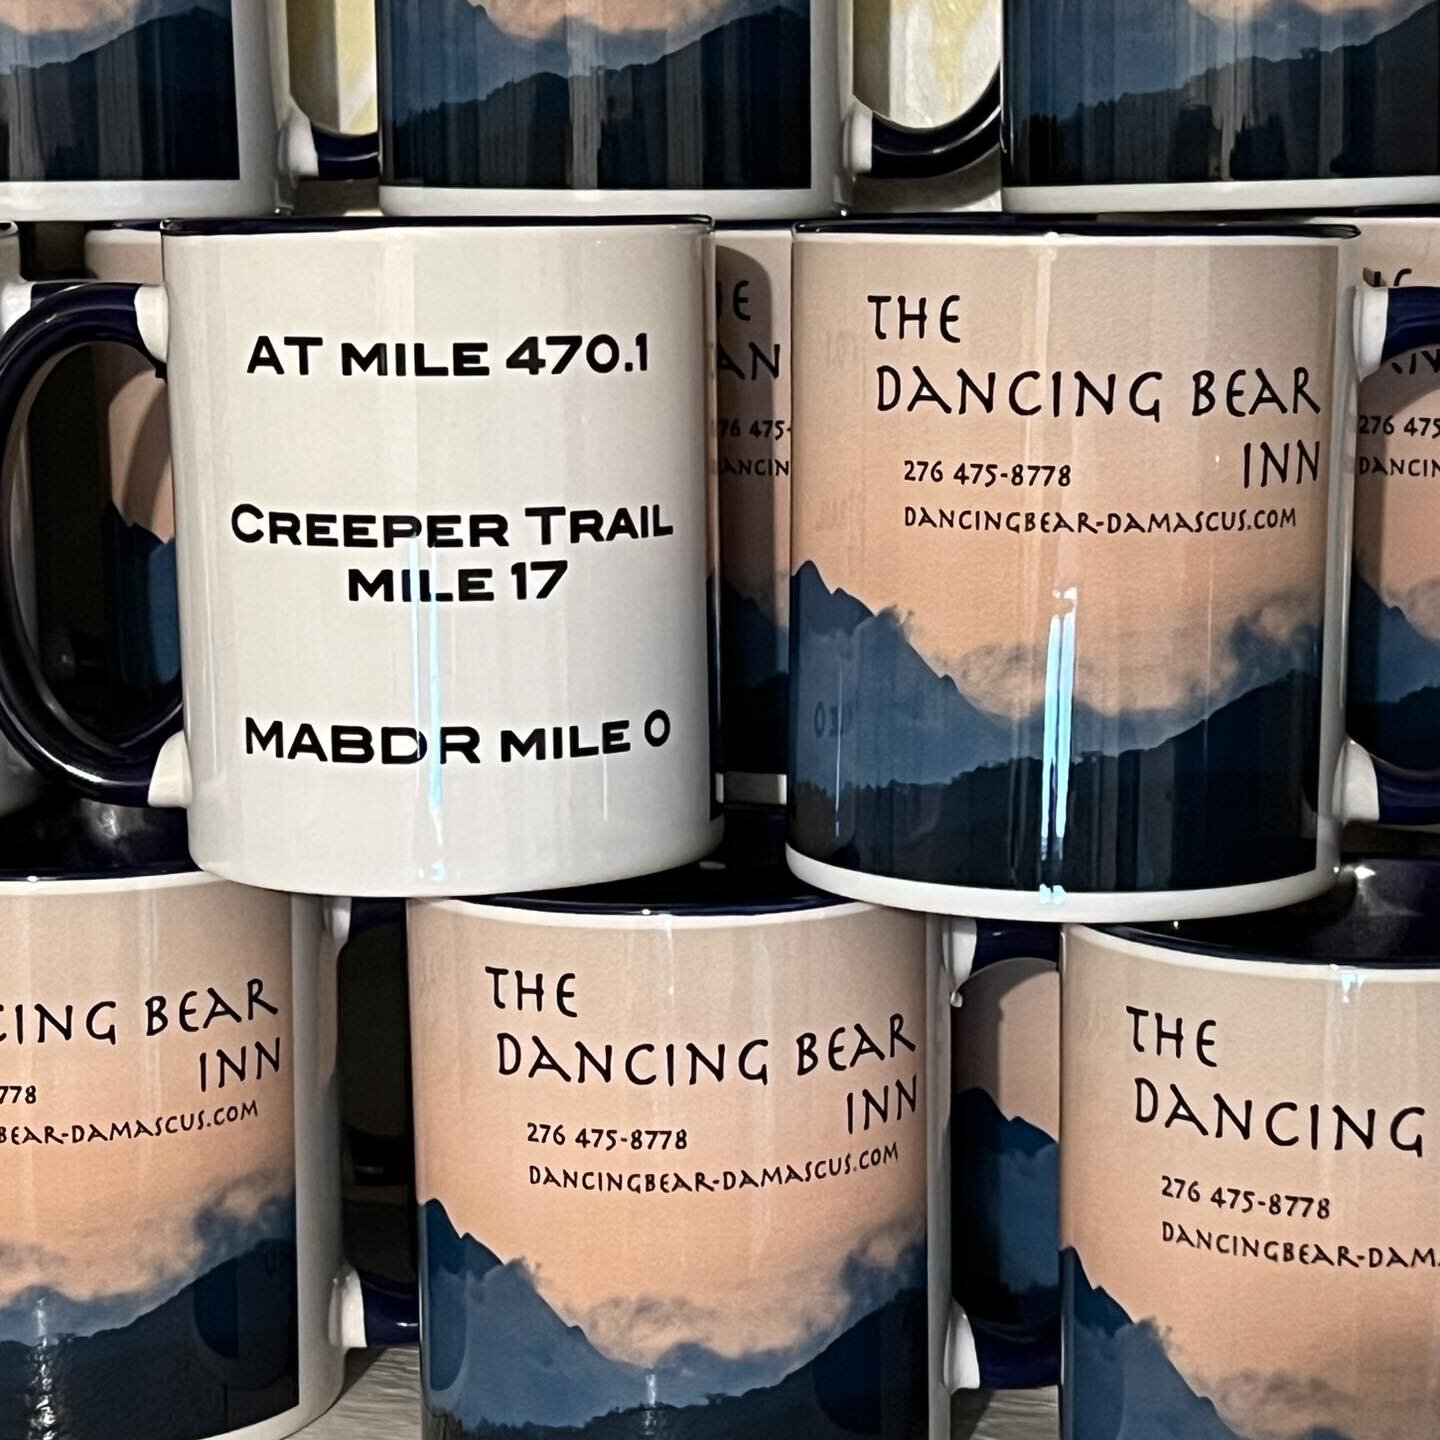 So excited to have our own mugs!
.
.
.
.
#dancingbearinn #Damascus #damascusva #visitdamascusva #TheDancingBear #ridebdr #creepertrailva #mabdr